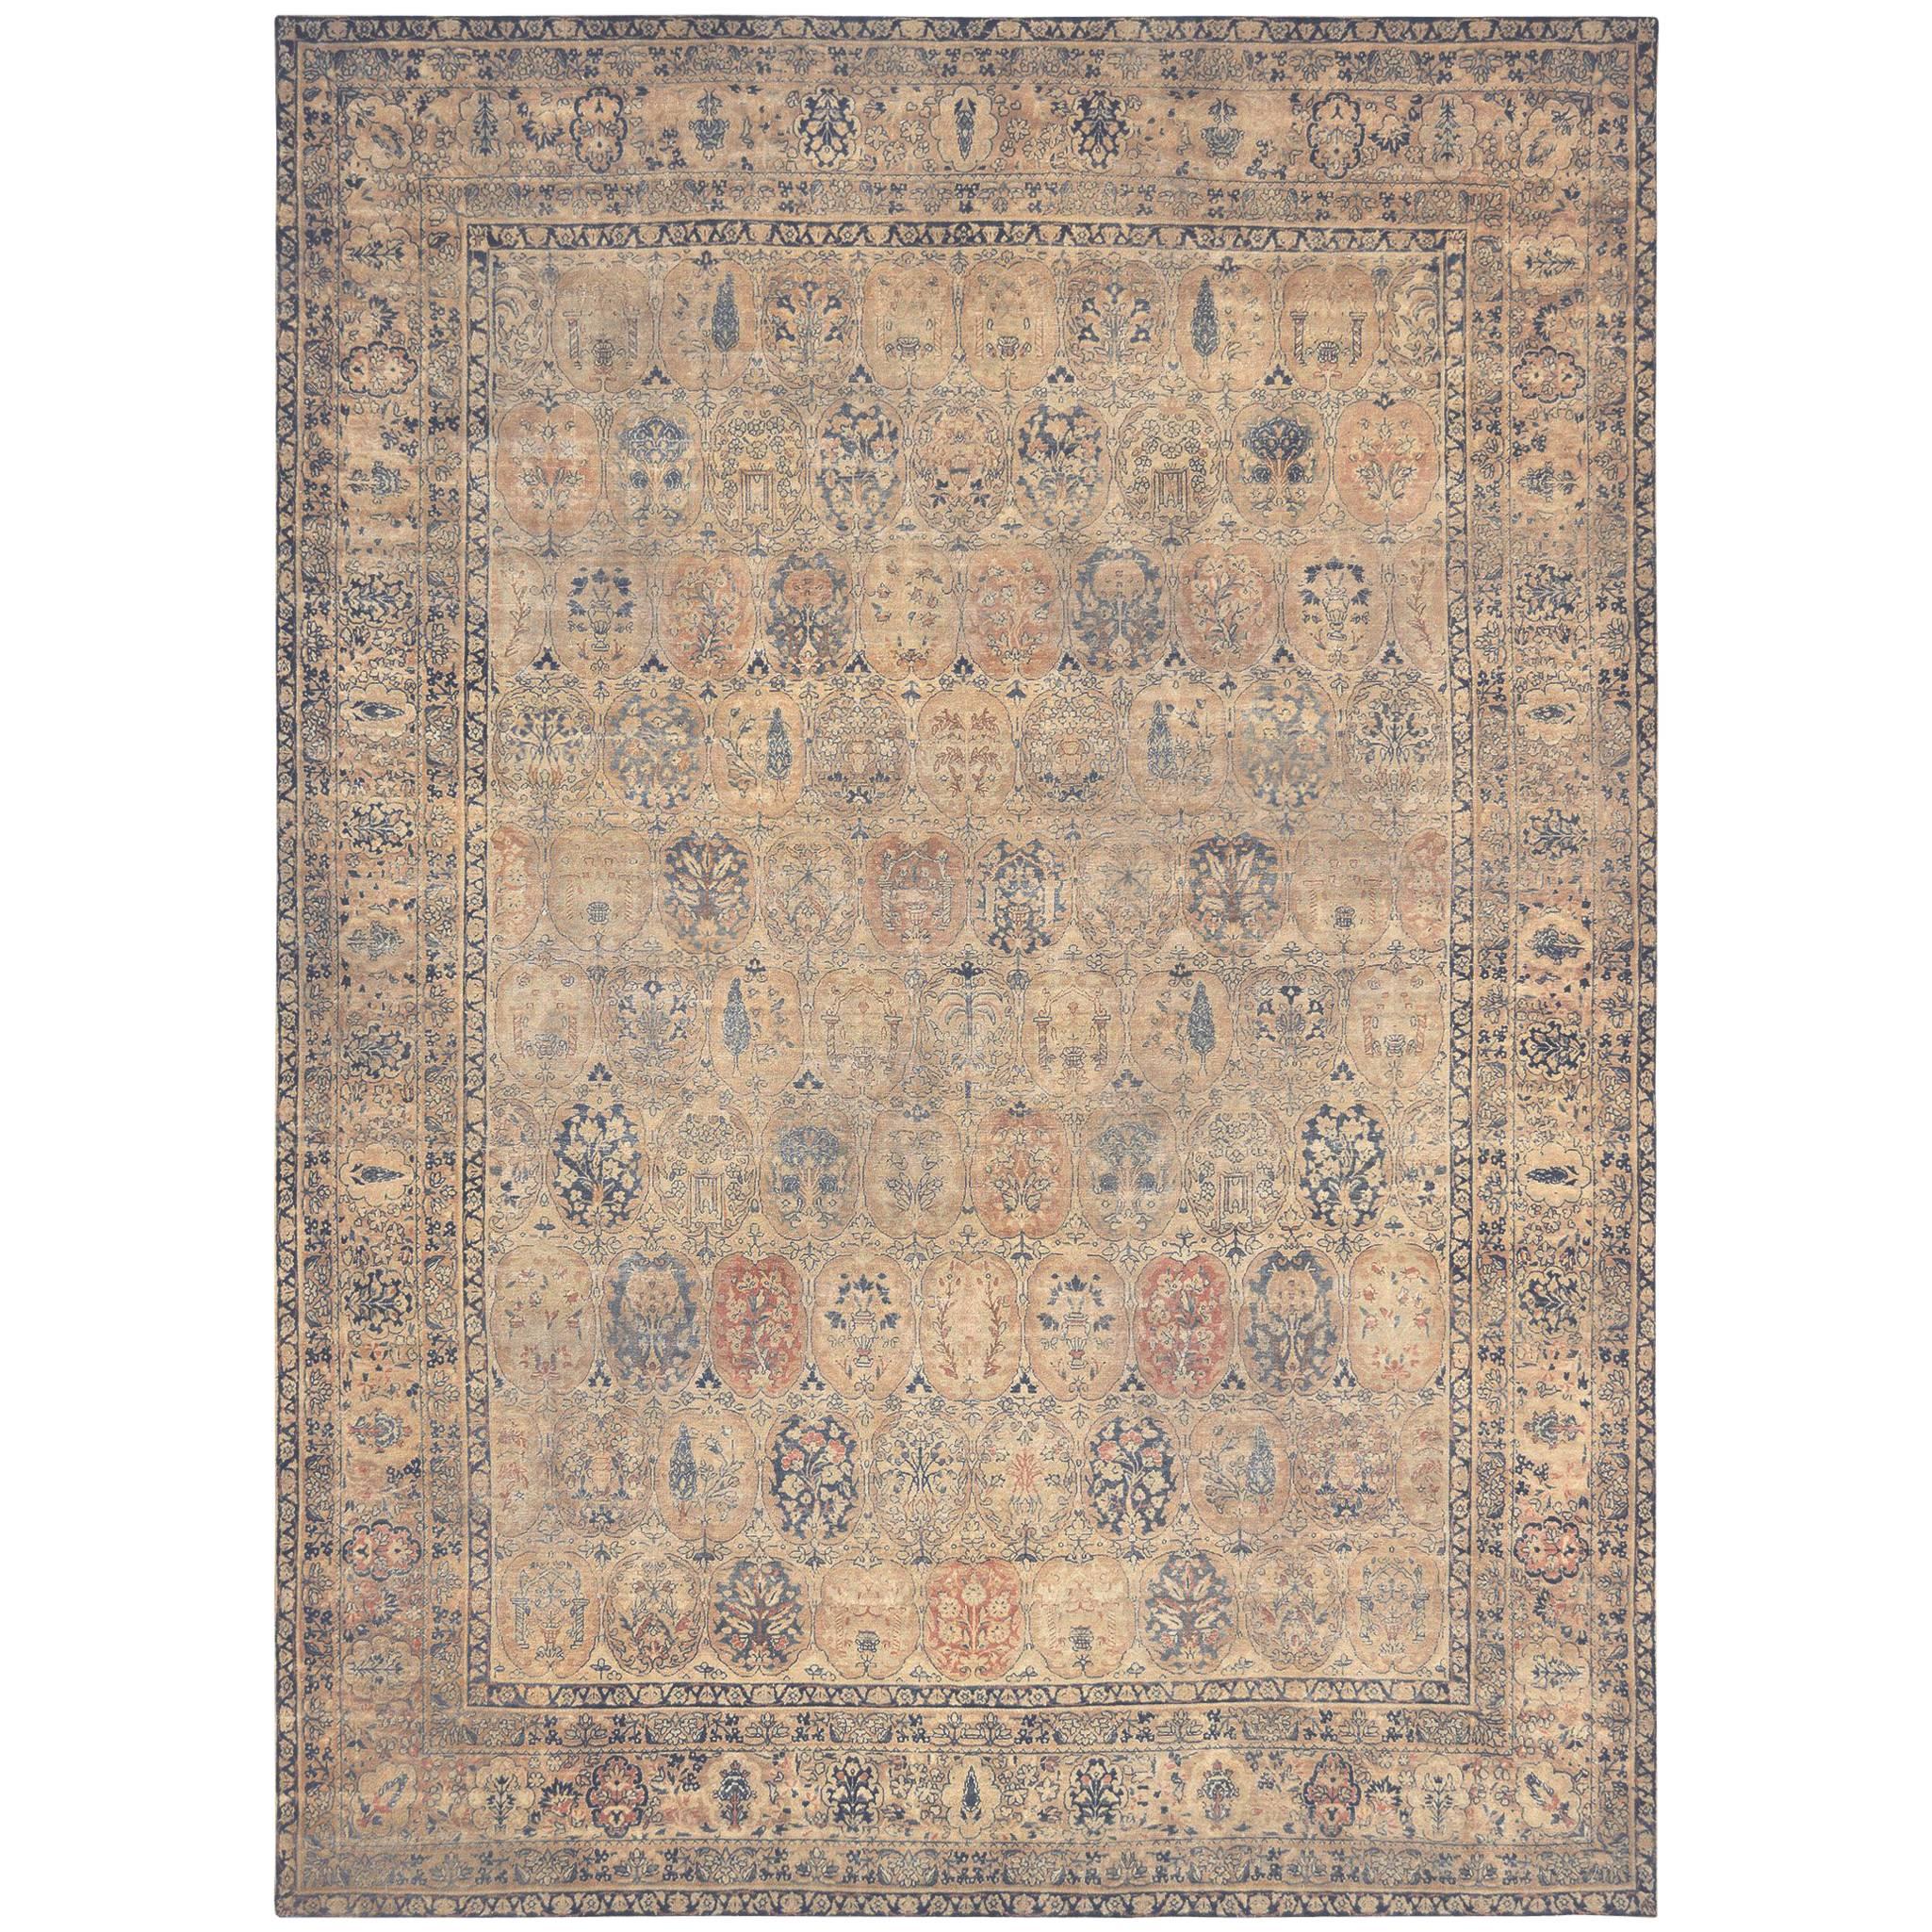 Late 19th Century Hand-woven Wool Kerman Rug from Persia For Sale